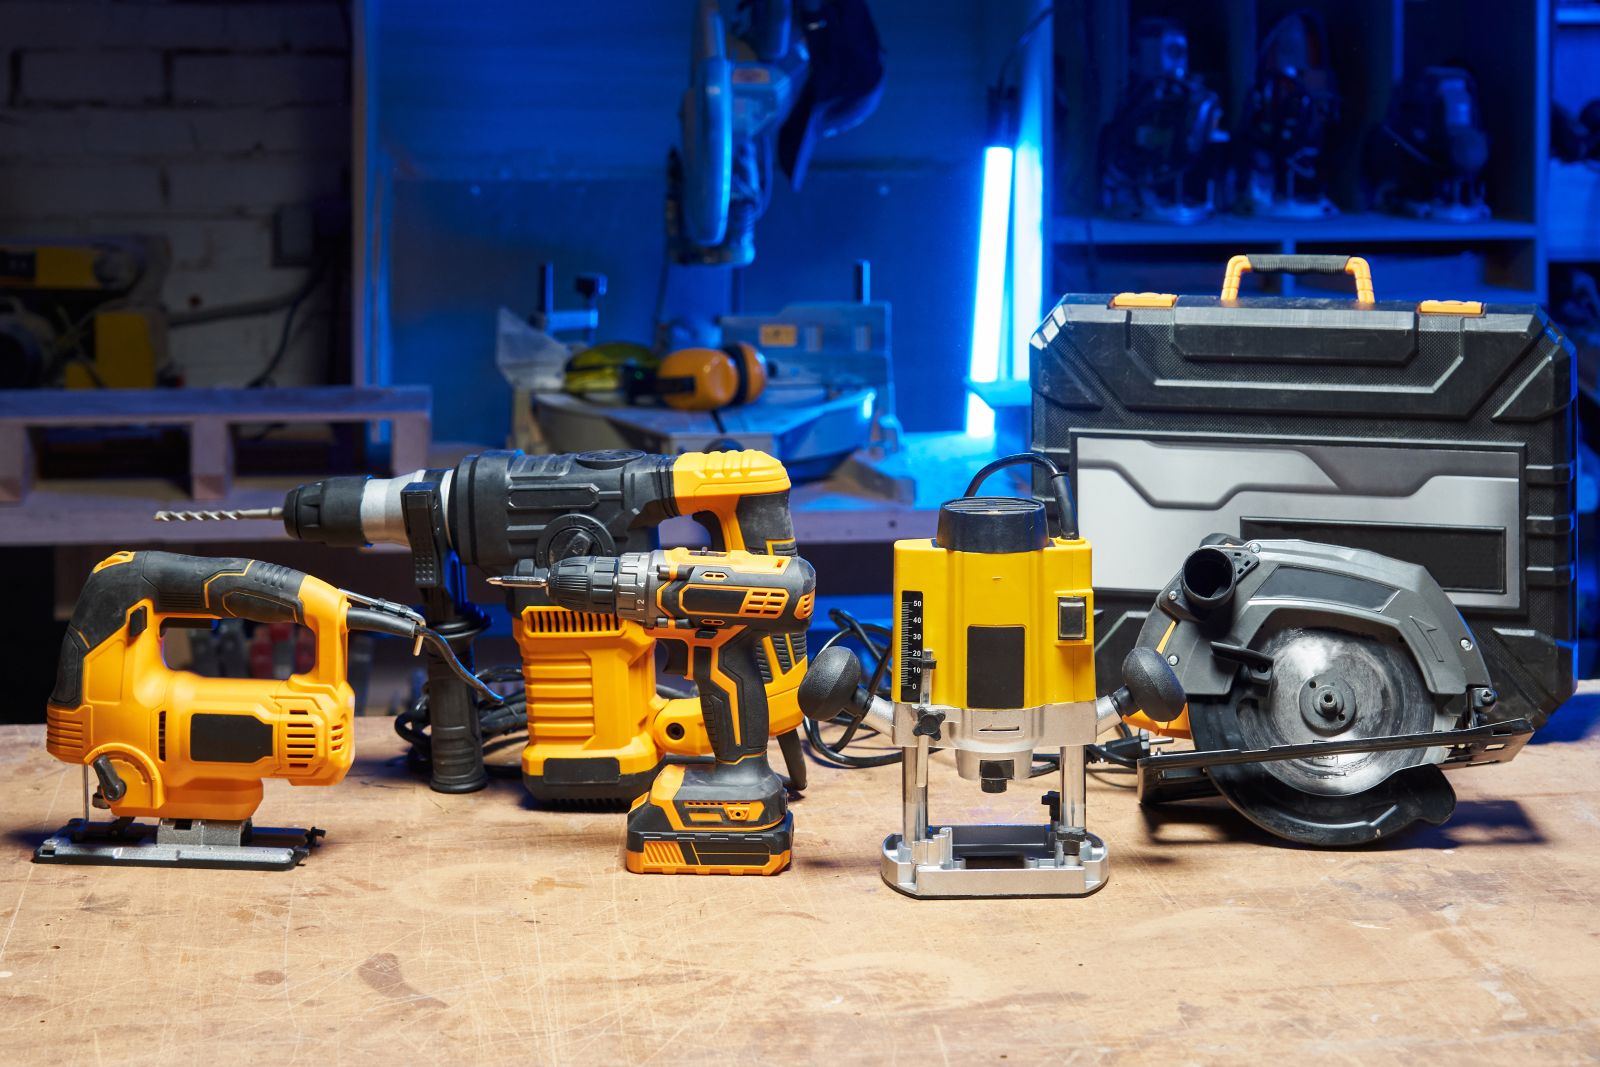 Variety of power tools arranged on a wooden workbench in a workshop, featuring a drill, jigsaw, circular saw, and more, highlighting versatility and utility for DIY projects.